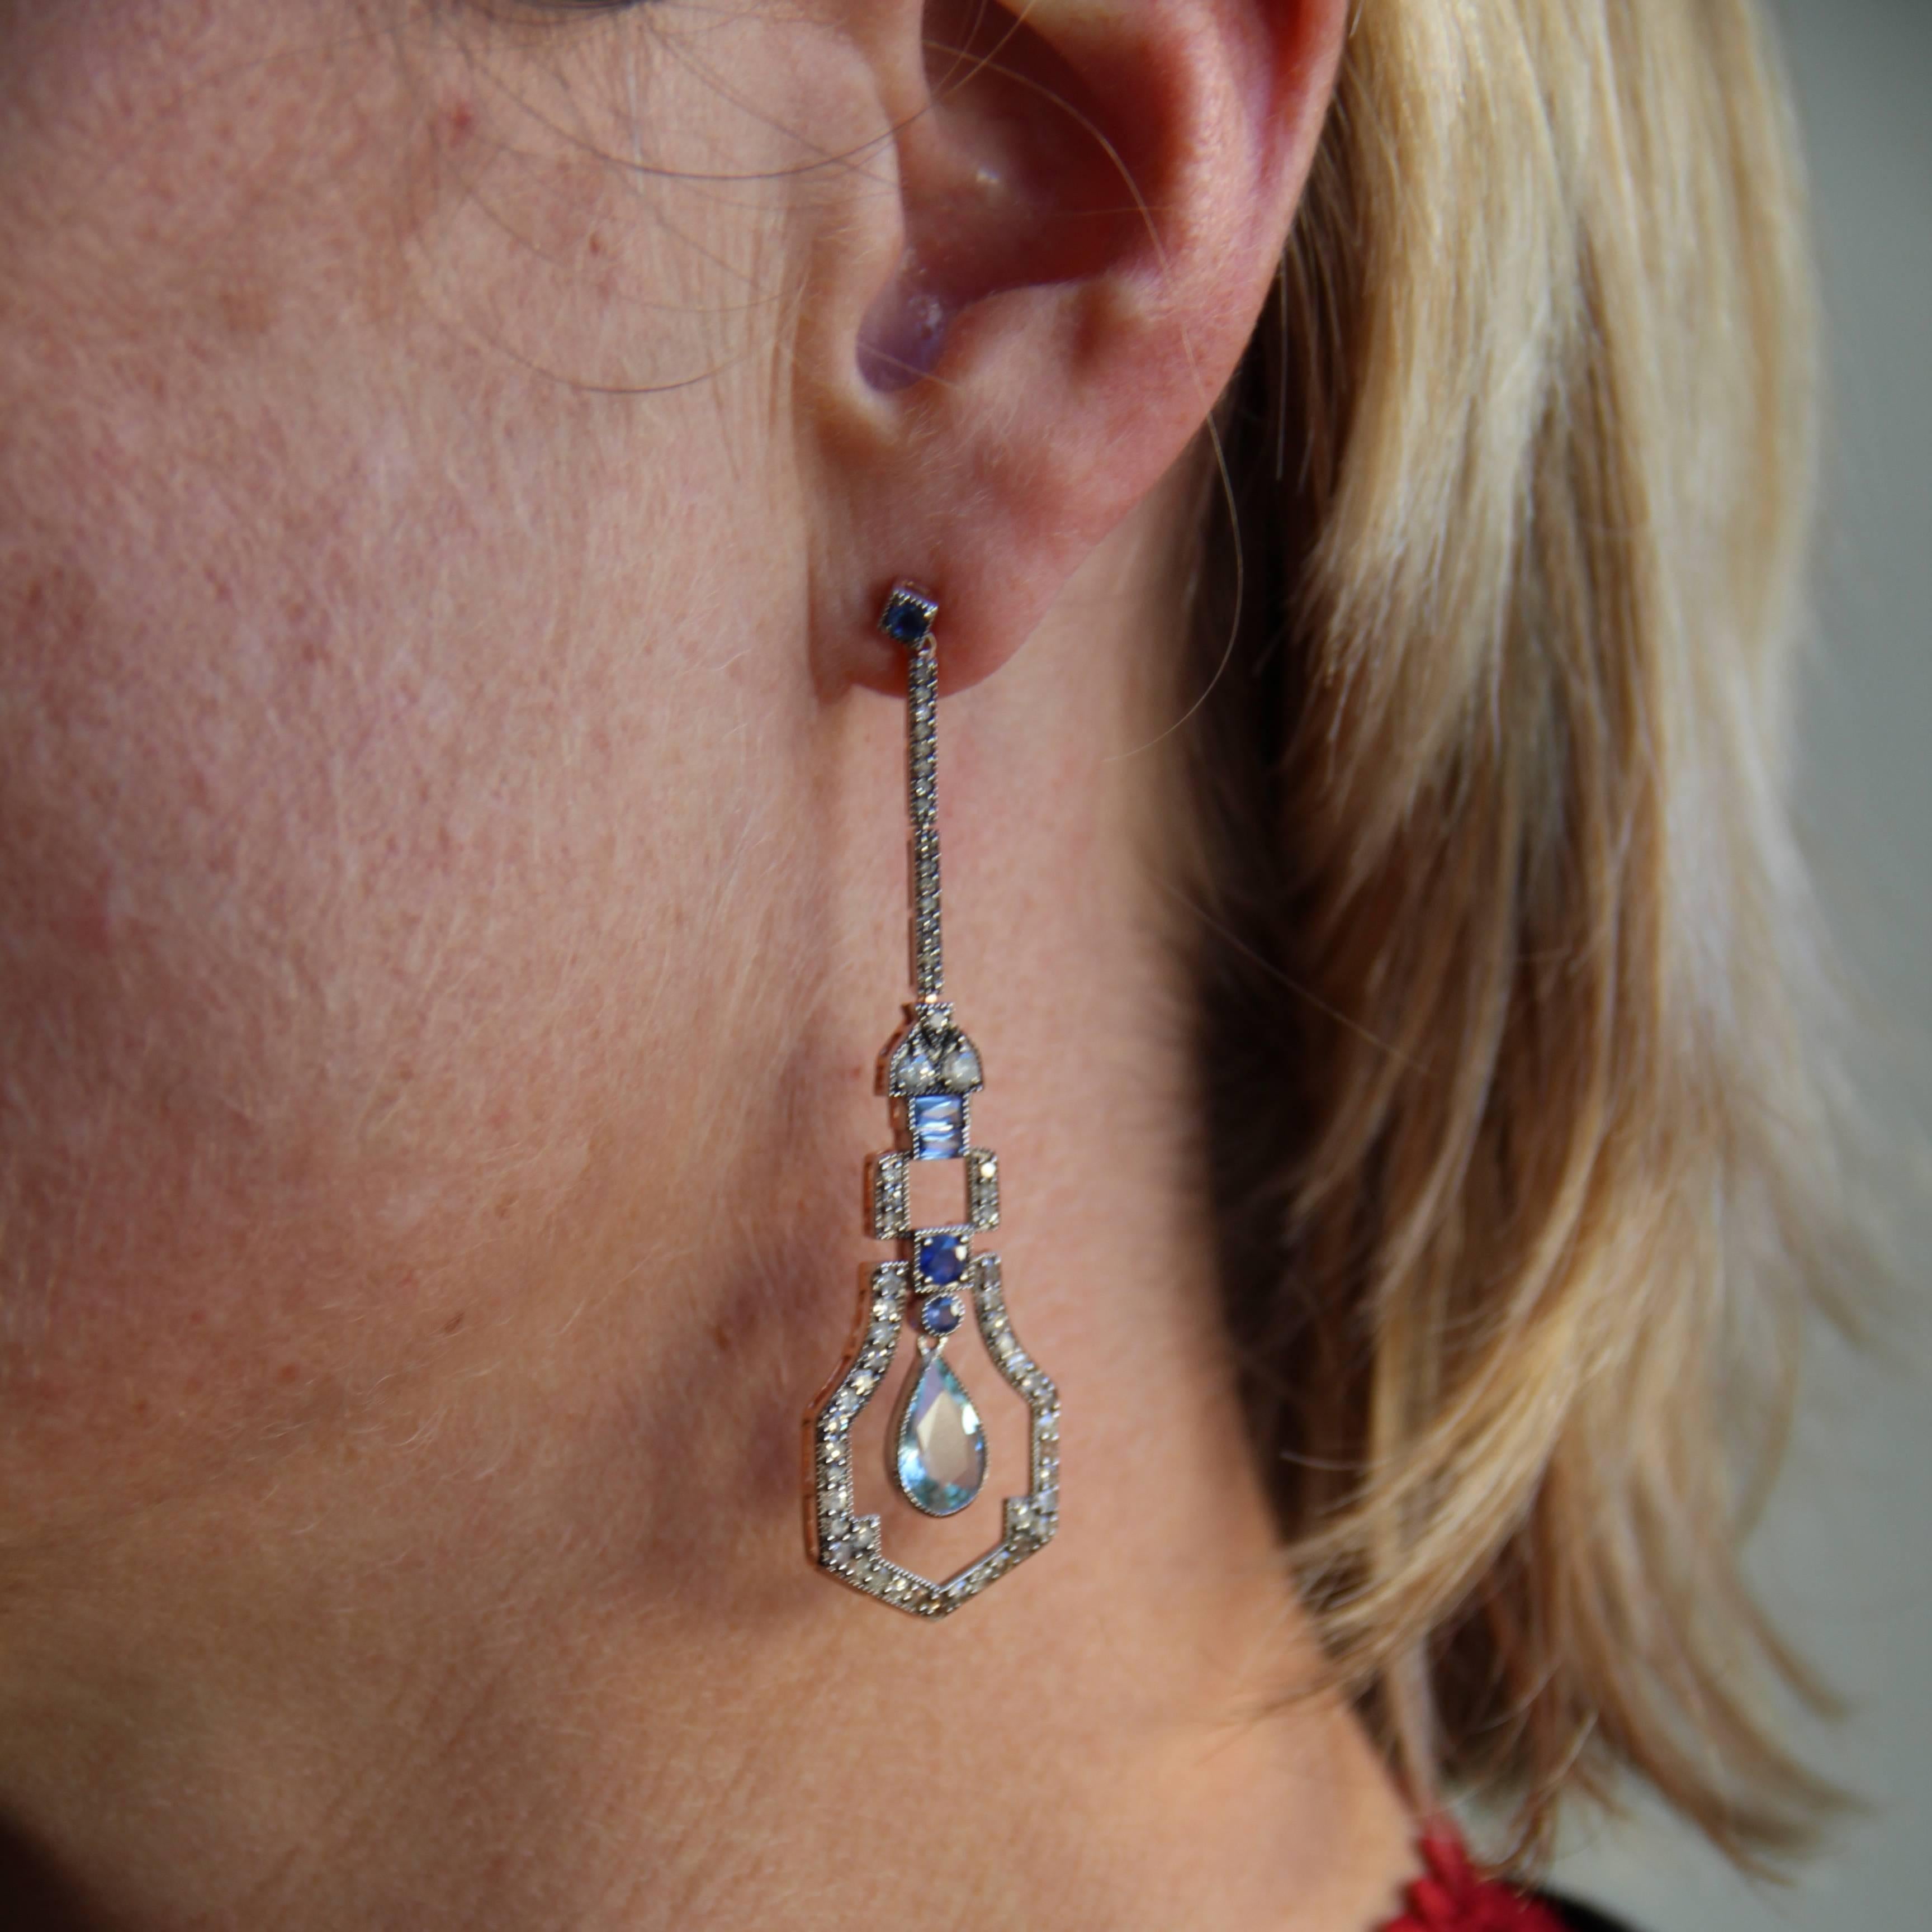 For pierced ears.
Earrings in vermeil, silver and rose gold.
Inspired by Art Deco lines, these earrings are made of a blue sapphire that holds a double articulated line set with rose-cut diamonds, which itself retains a geometric motif set with